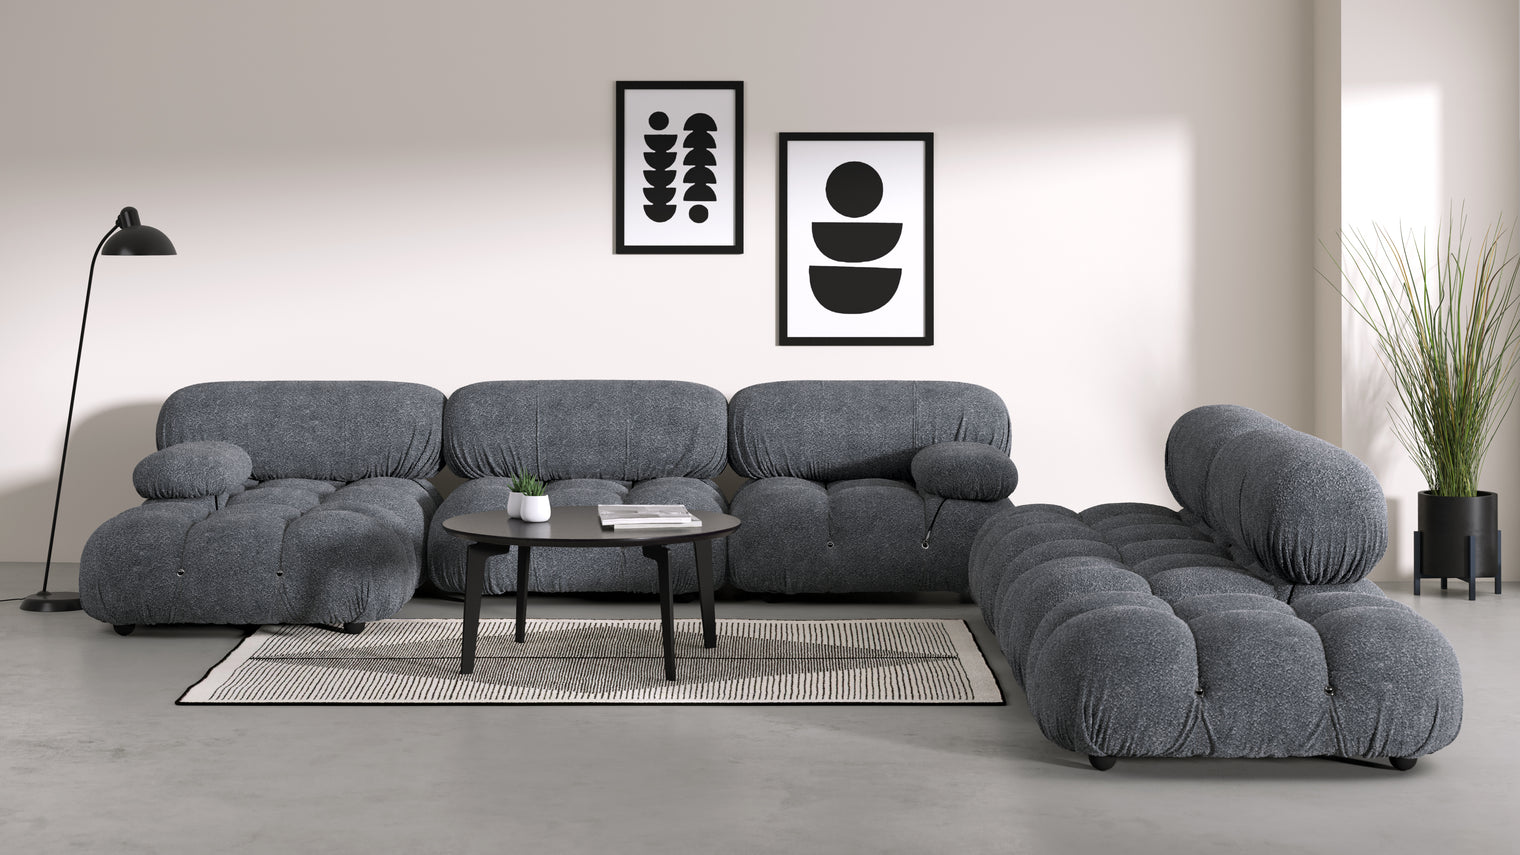 Stylish Sectional|With the Bellini's sectional design, you can create a sofa that suits your space. The soft curves of each carefully crafted cushion create a luxurious and comfortable seat for the ultimate in stylish comfort.
